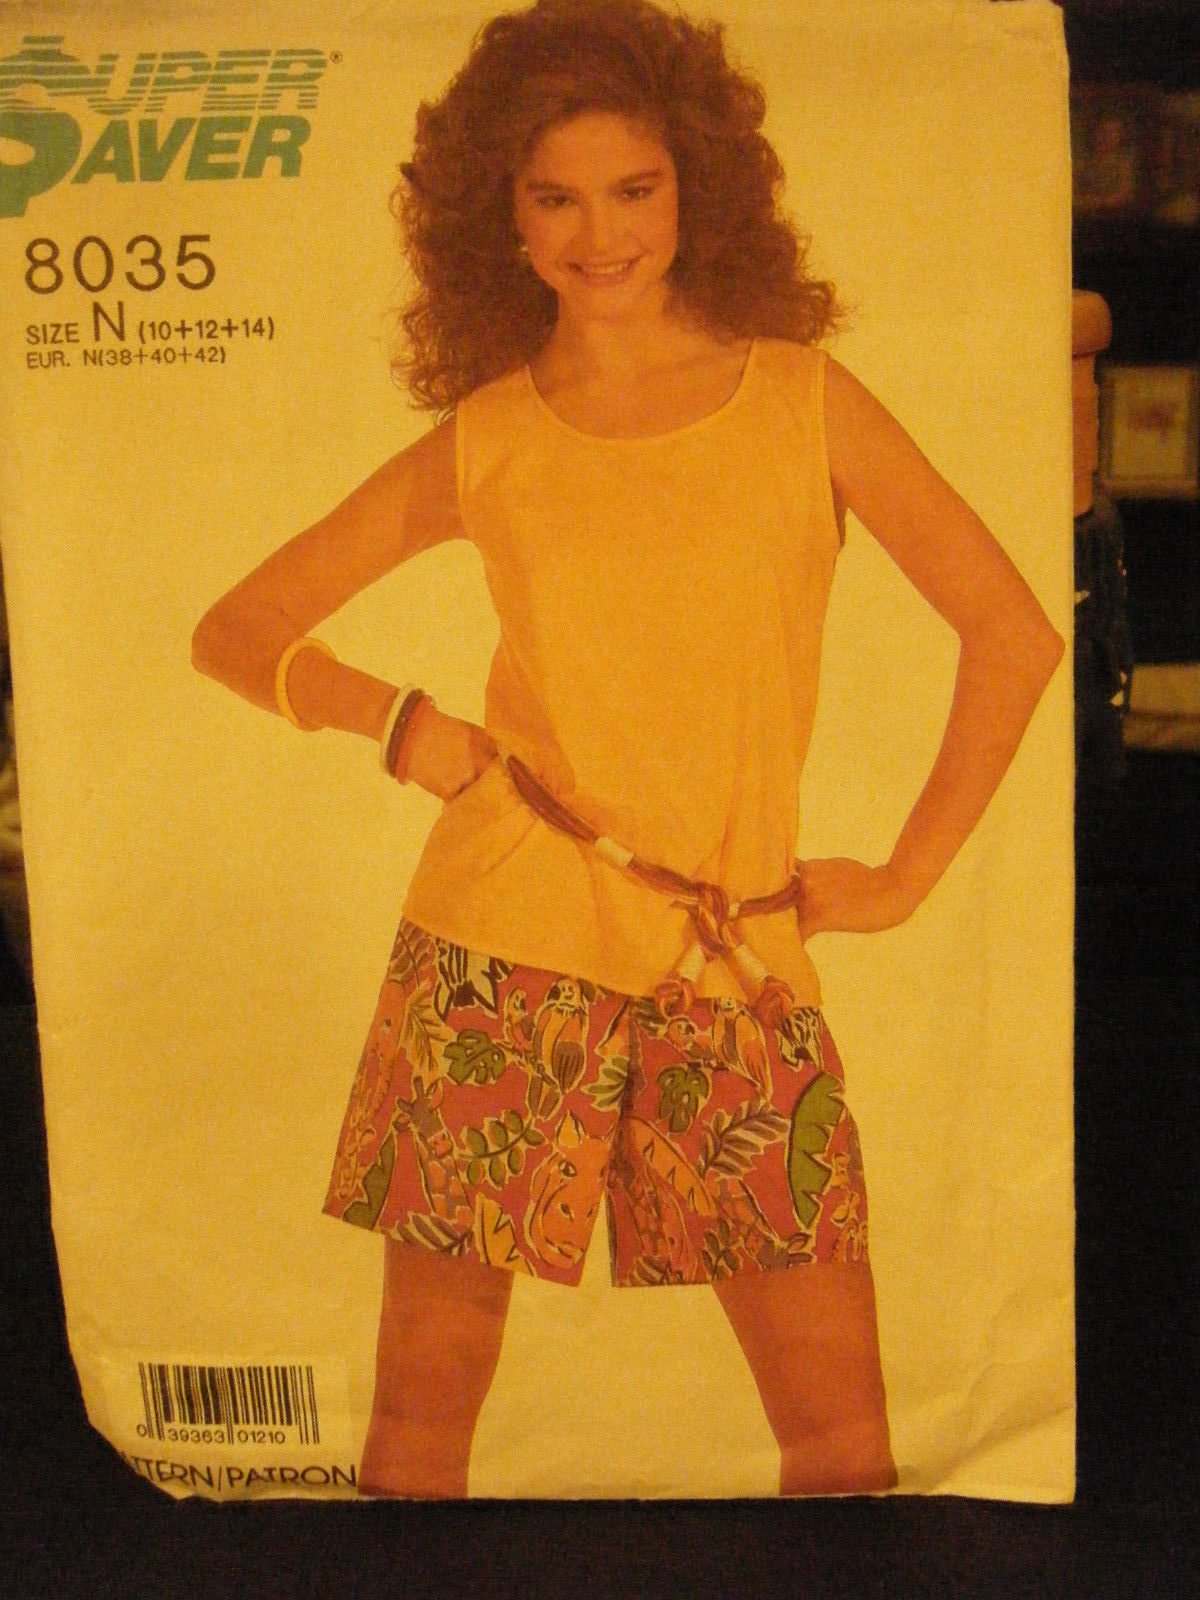 Primary image for Simplicity Super Saver 8035 Misses Top & Pull-On Pants Pattern - Size 10 & 12